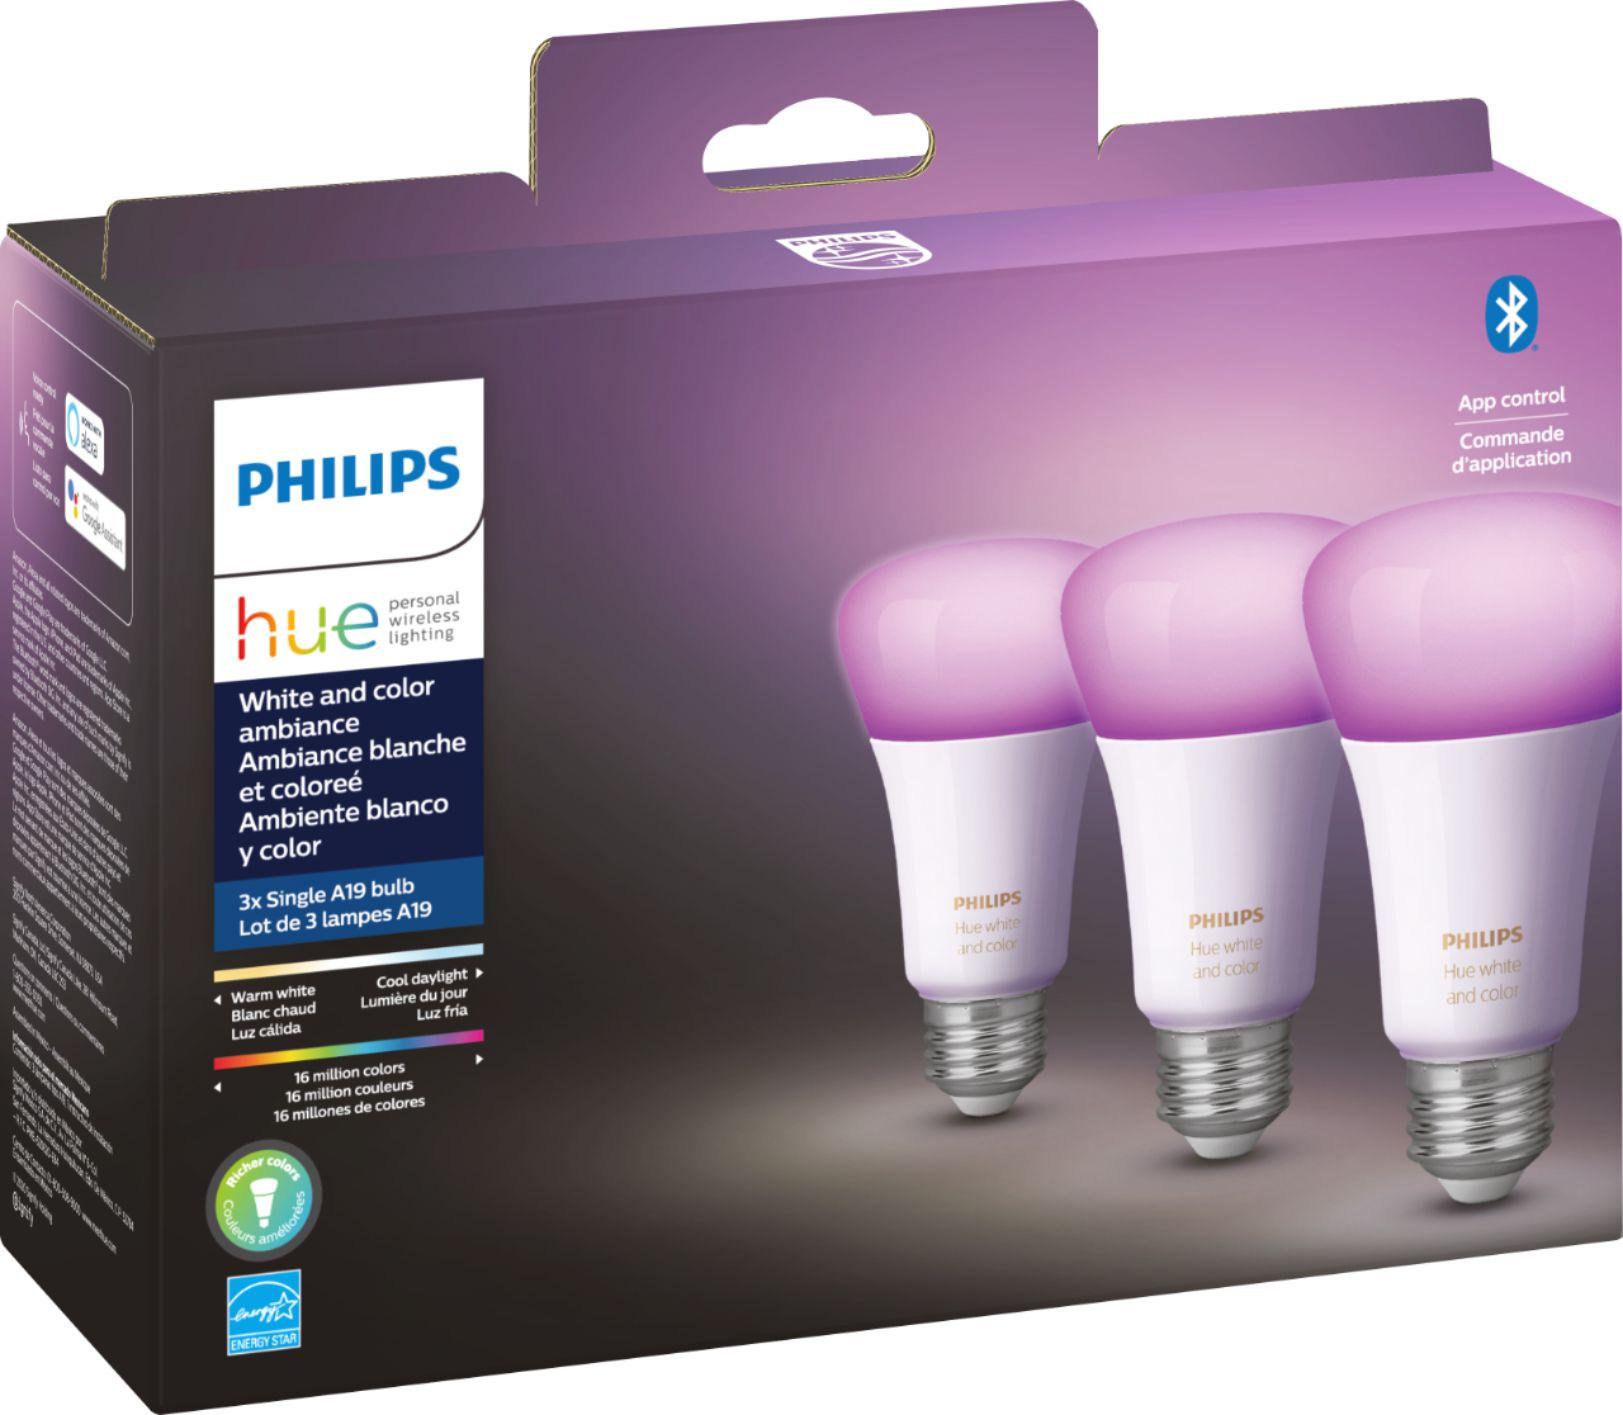 3 Philips Hue White and Color Ambiance A19 LED Smart Bulbs for $89.99 Shipped